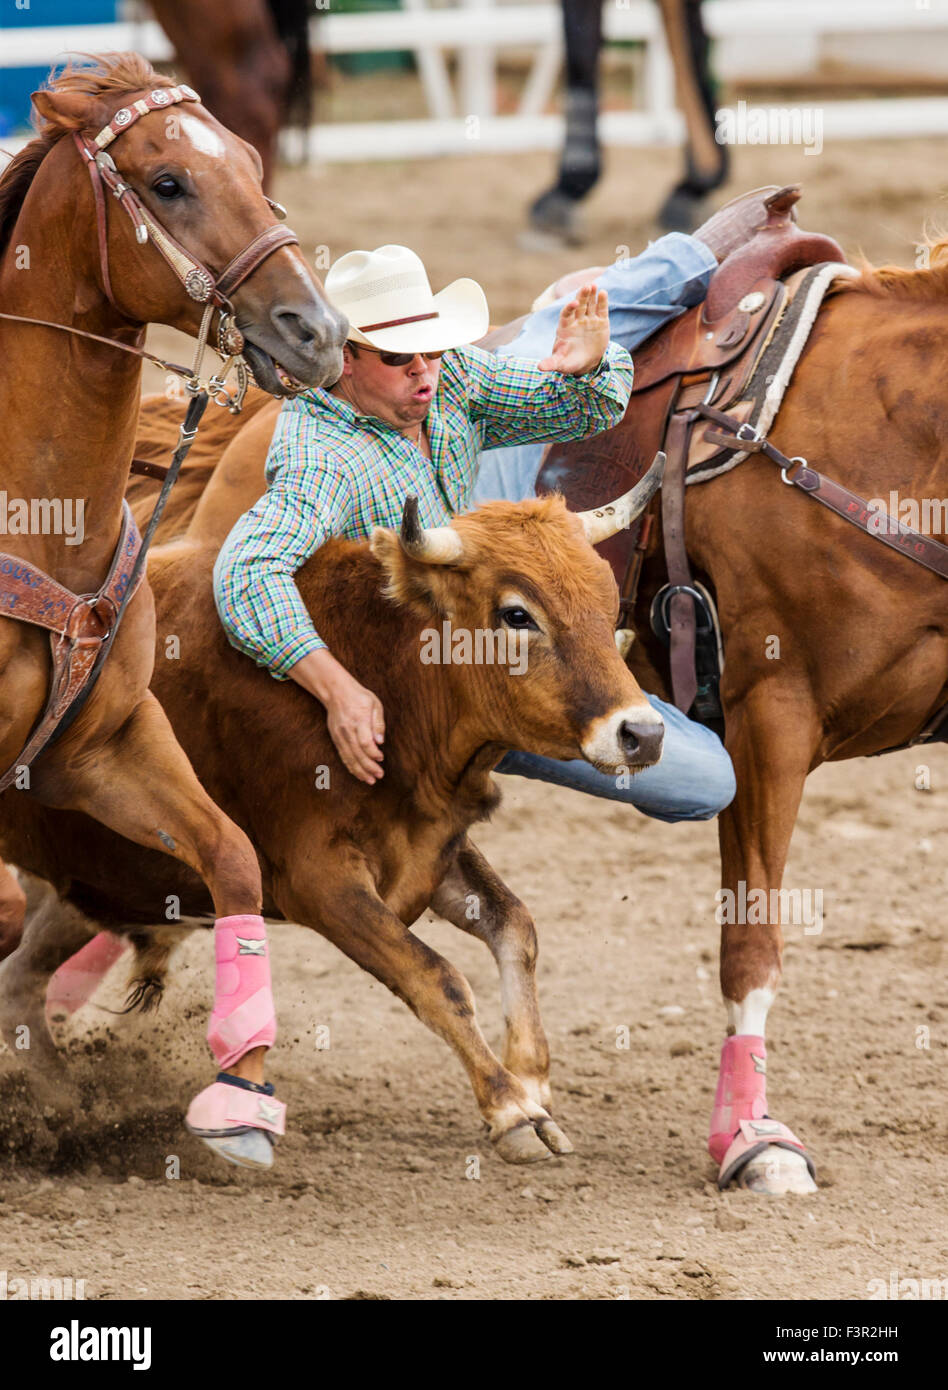 Rodeo cowboys on horseback competing in steer wrestling event, Chaffee County Fair & Rodeo, Salida, Colorado, USA Stock Photo